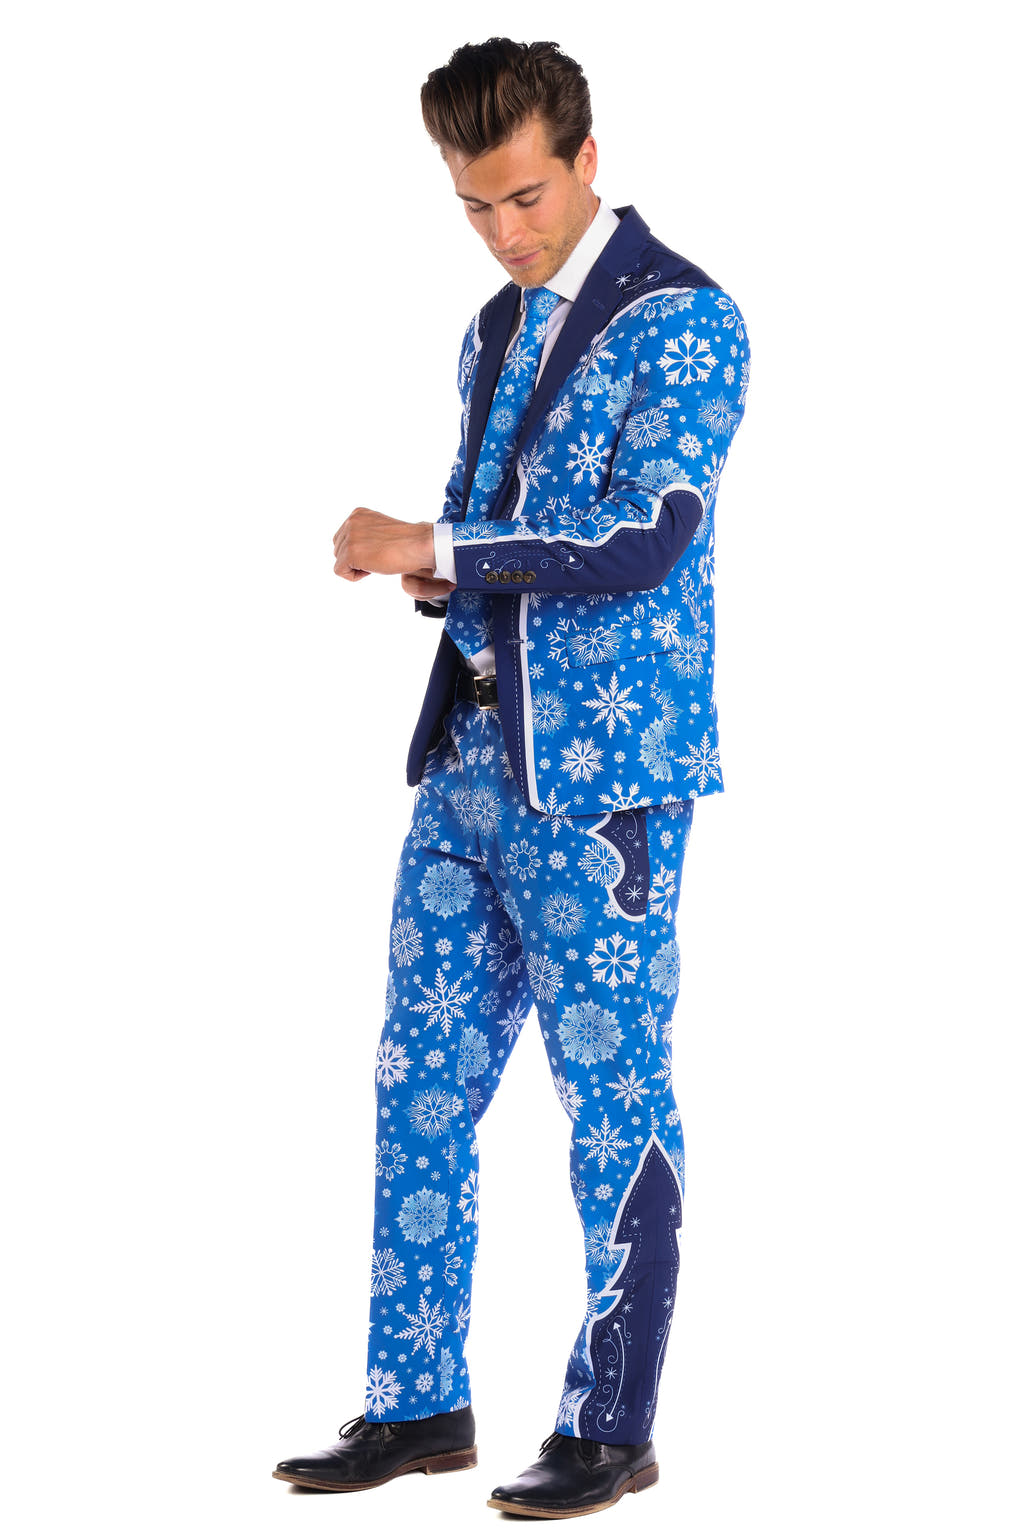 The Ice Never Melts | Blue Snowflake Christmas Suit